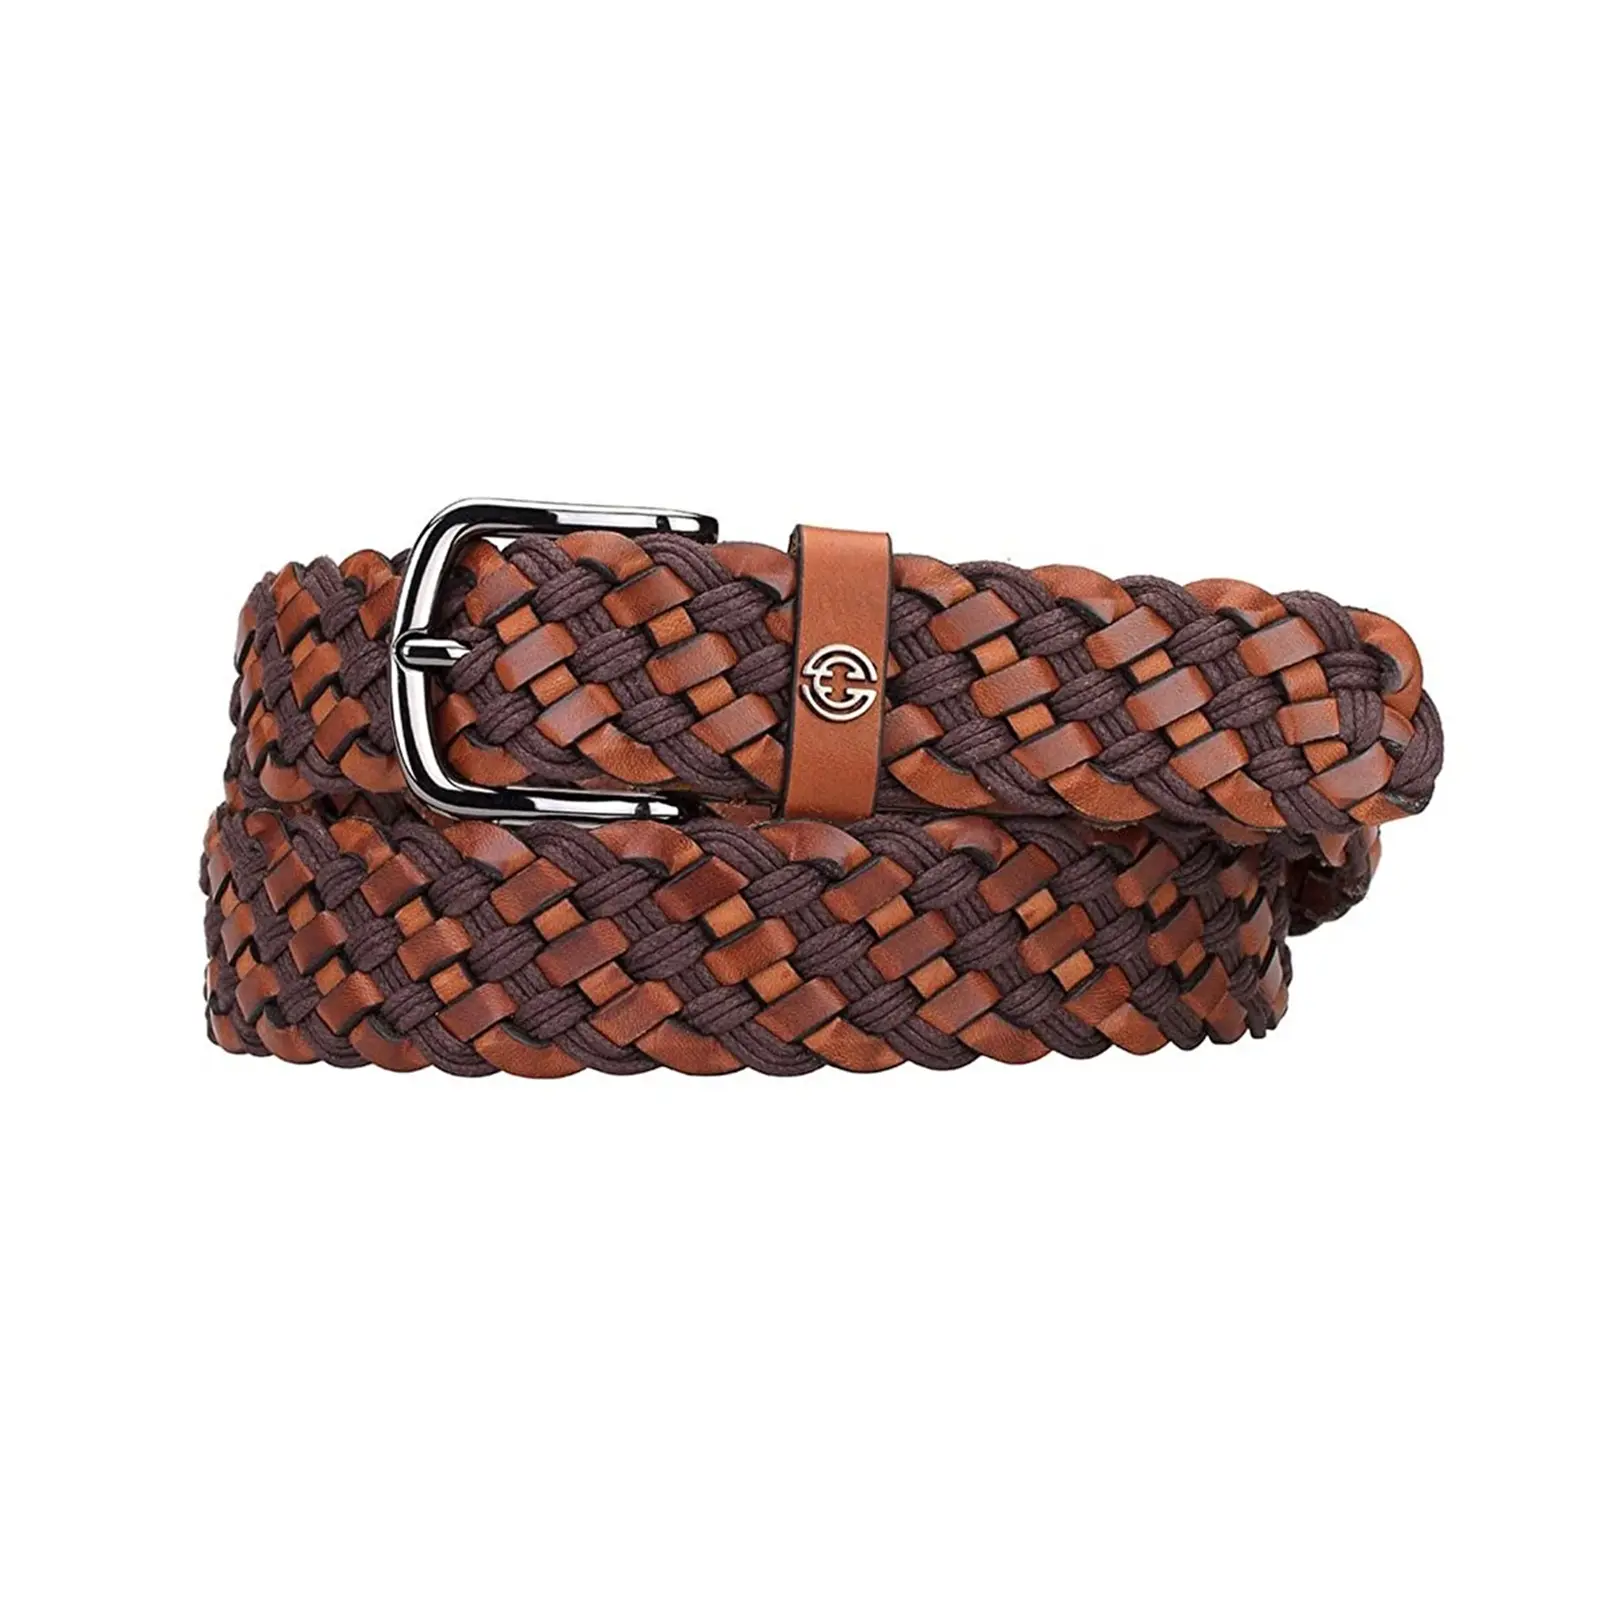 Braided belt in light brown leather